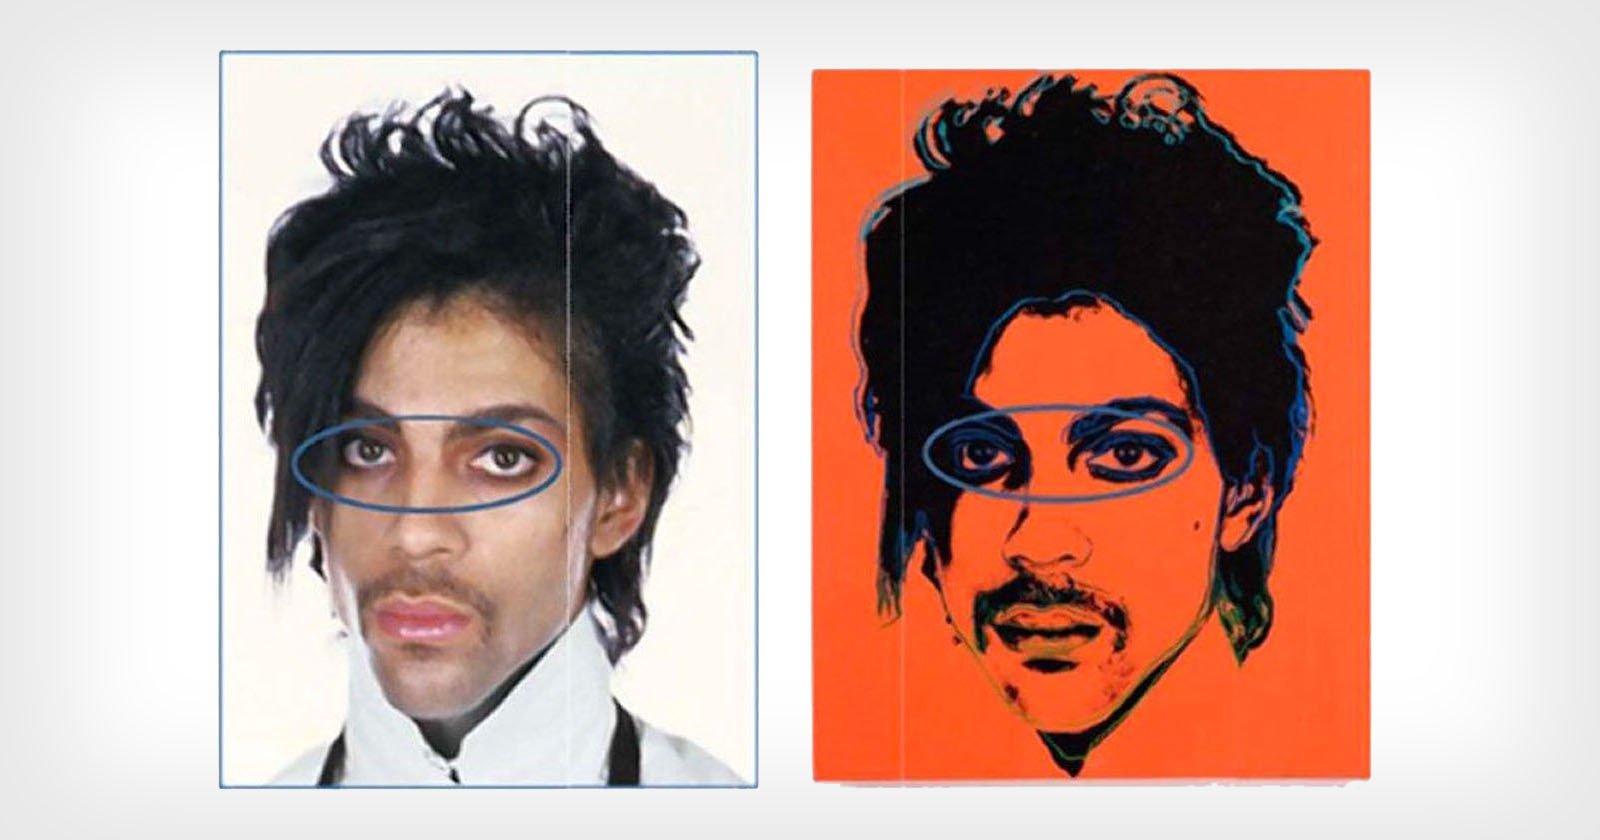  copyright office argues warhol use prince photo was 